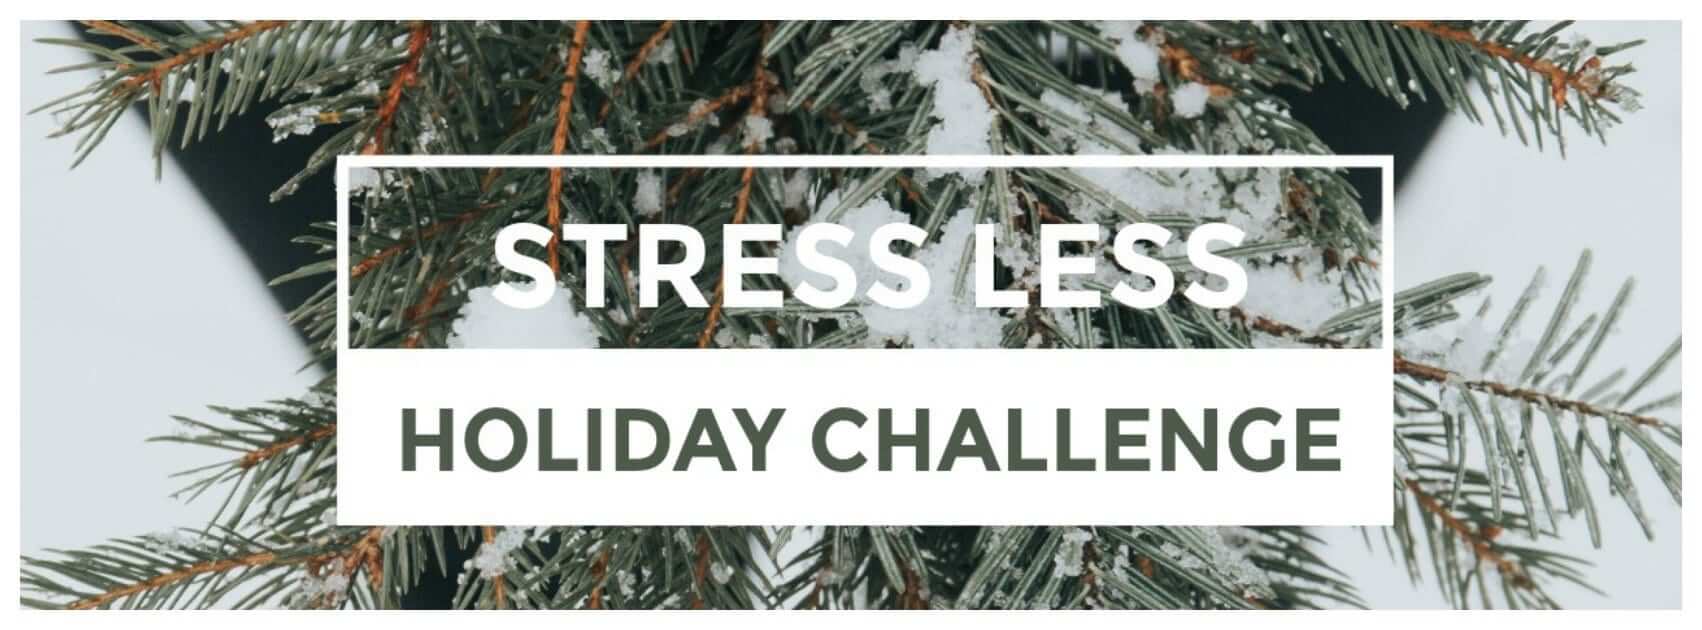 Stress Less Holiday Challenge